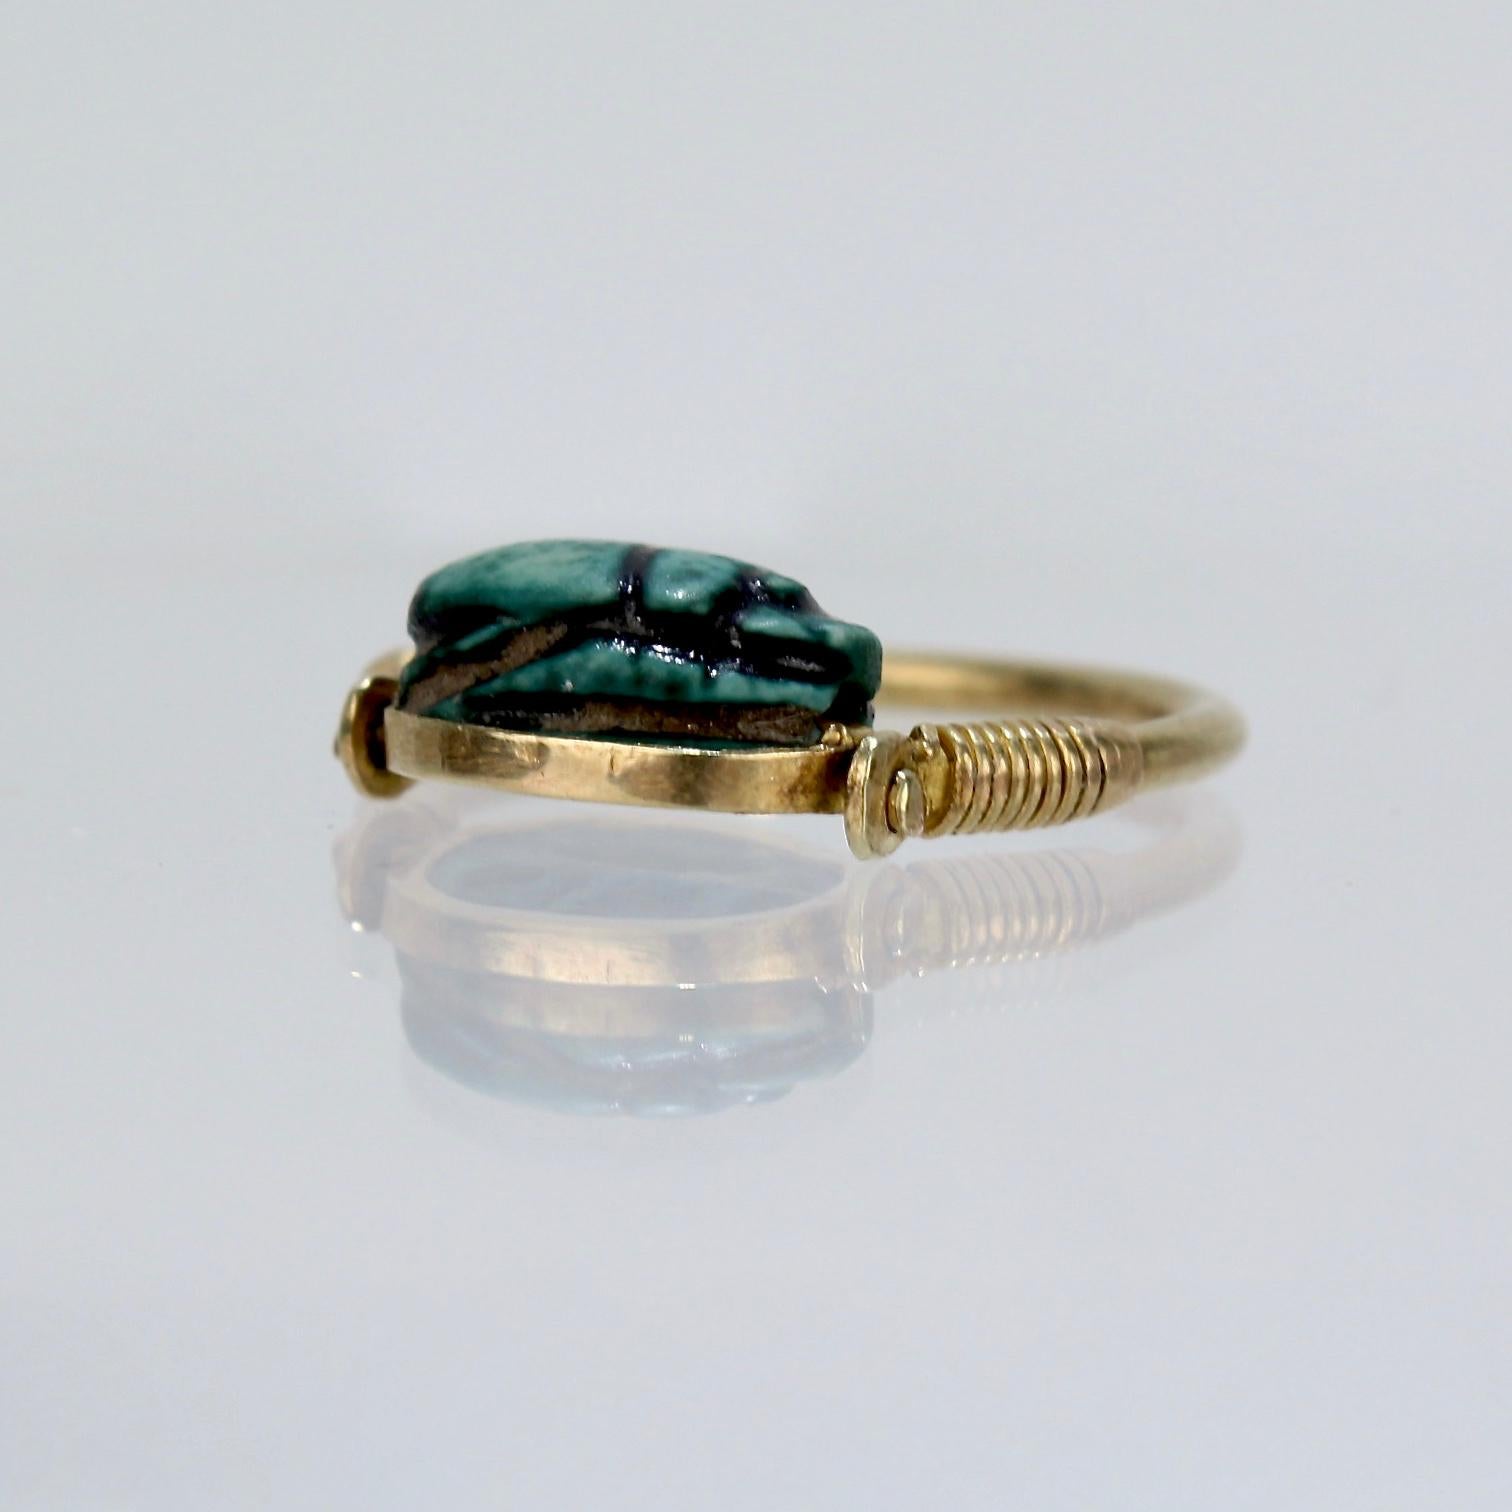 Women's or Men's Egyptian Steatite Scarab and Gold Finger Ring with Mohasseb & Son Provenance